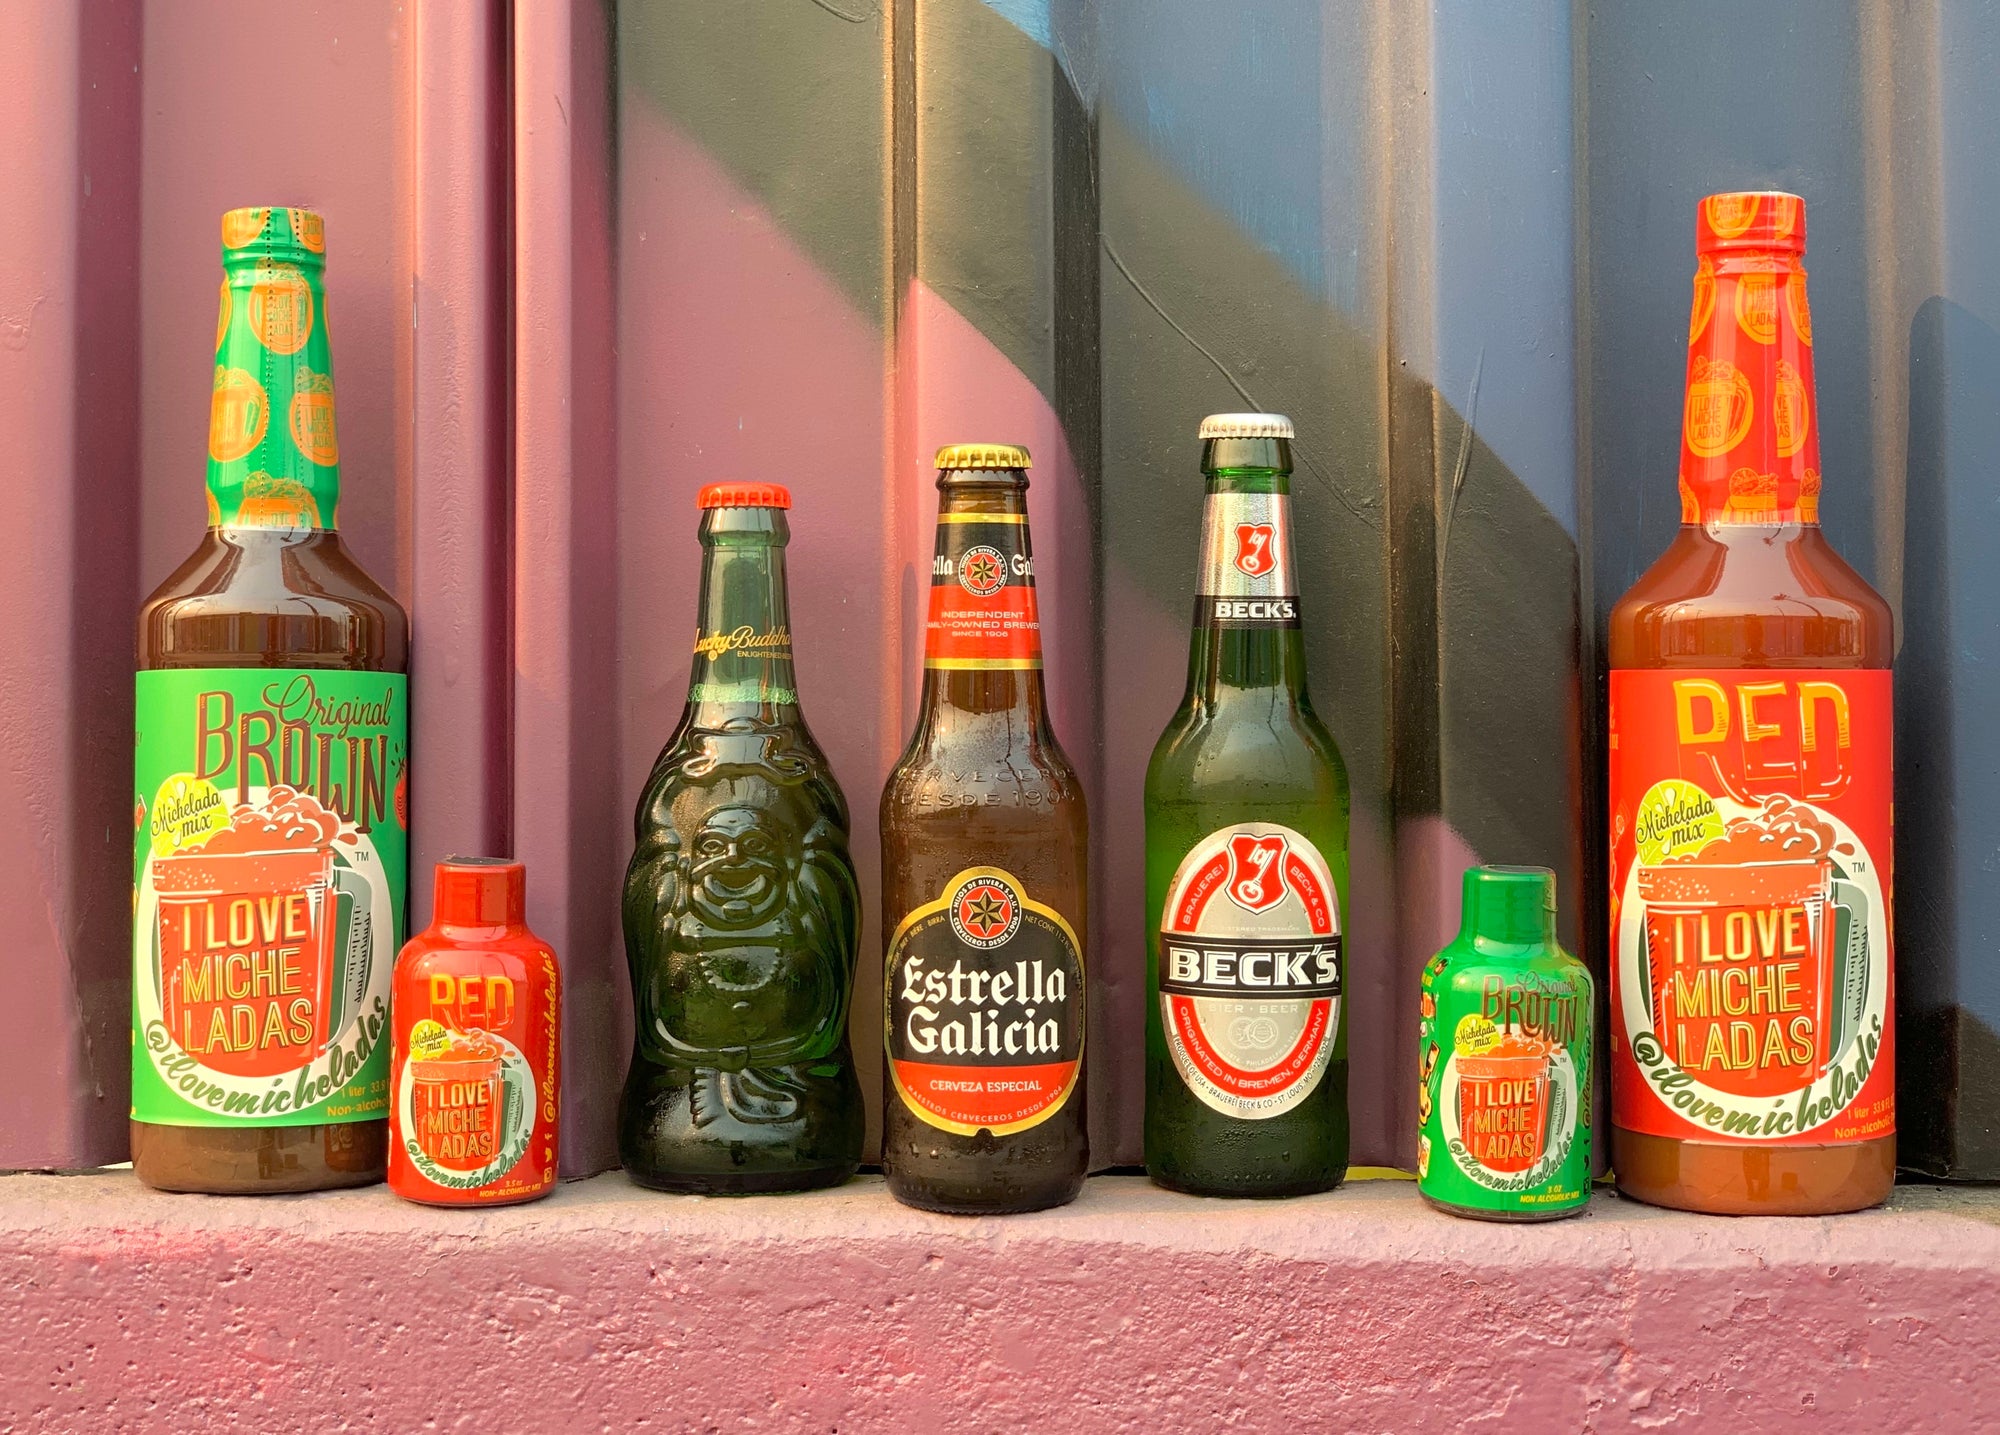 BEER RUN OF THE WEEK: WILL ANY OF THESE BEERS FROM AROUND THE WORLD HAVE A CONNECTION WITH OUR “I LOVE MICHELADAS” MIXES AS INTENSE AS CAROLE BASKIN'S LOVE AFFAIR WITH TIGERS?